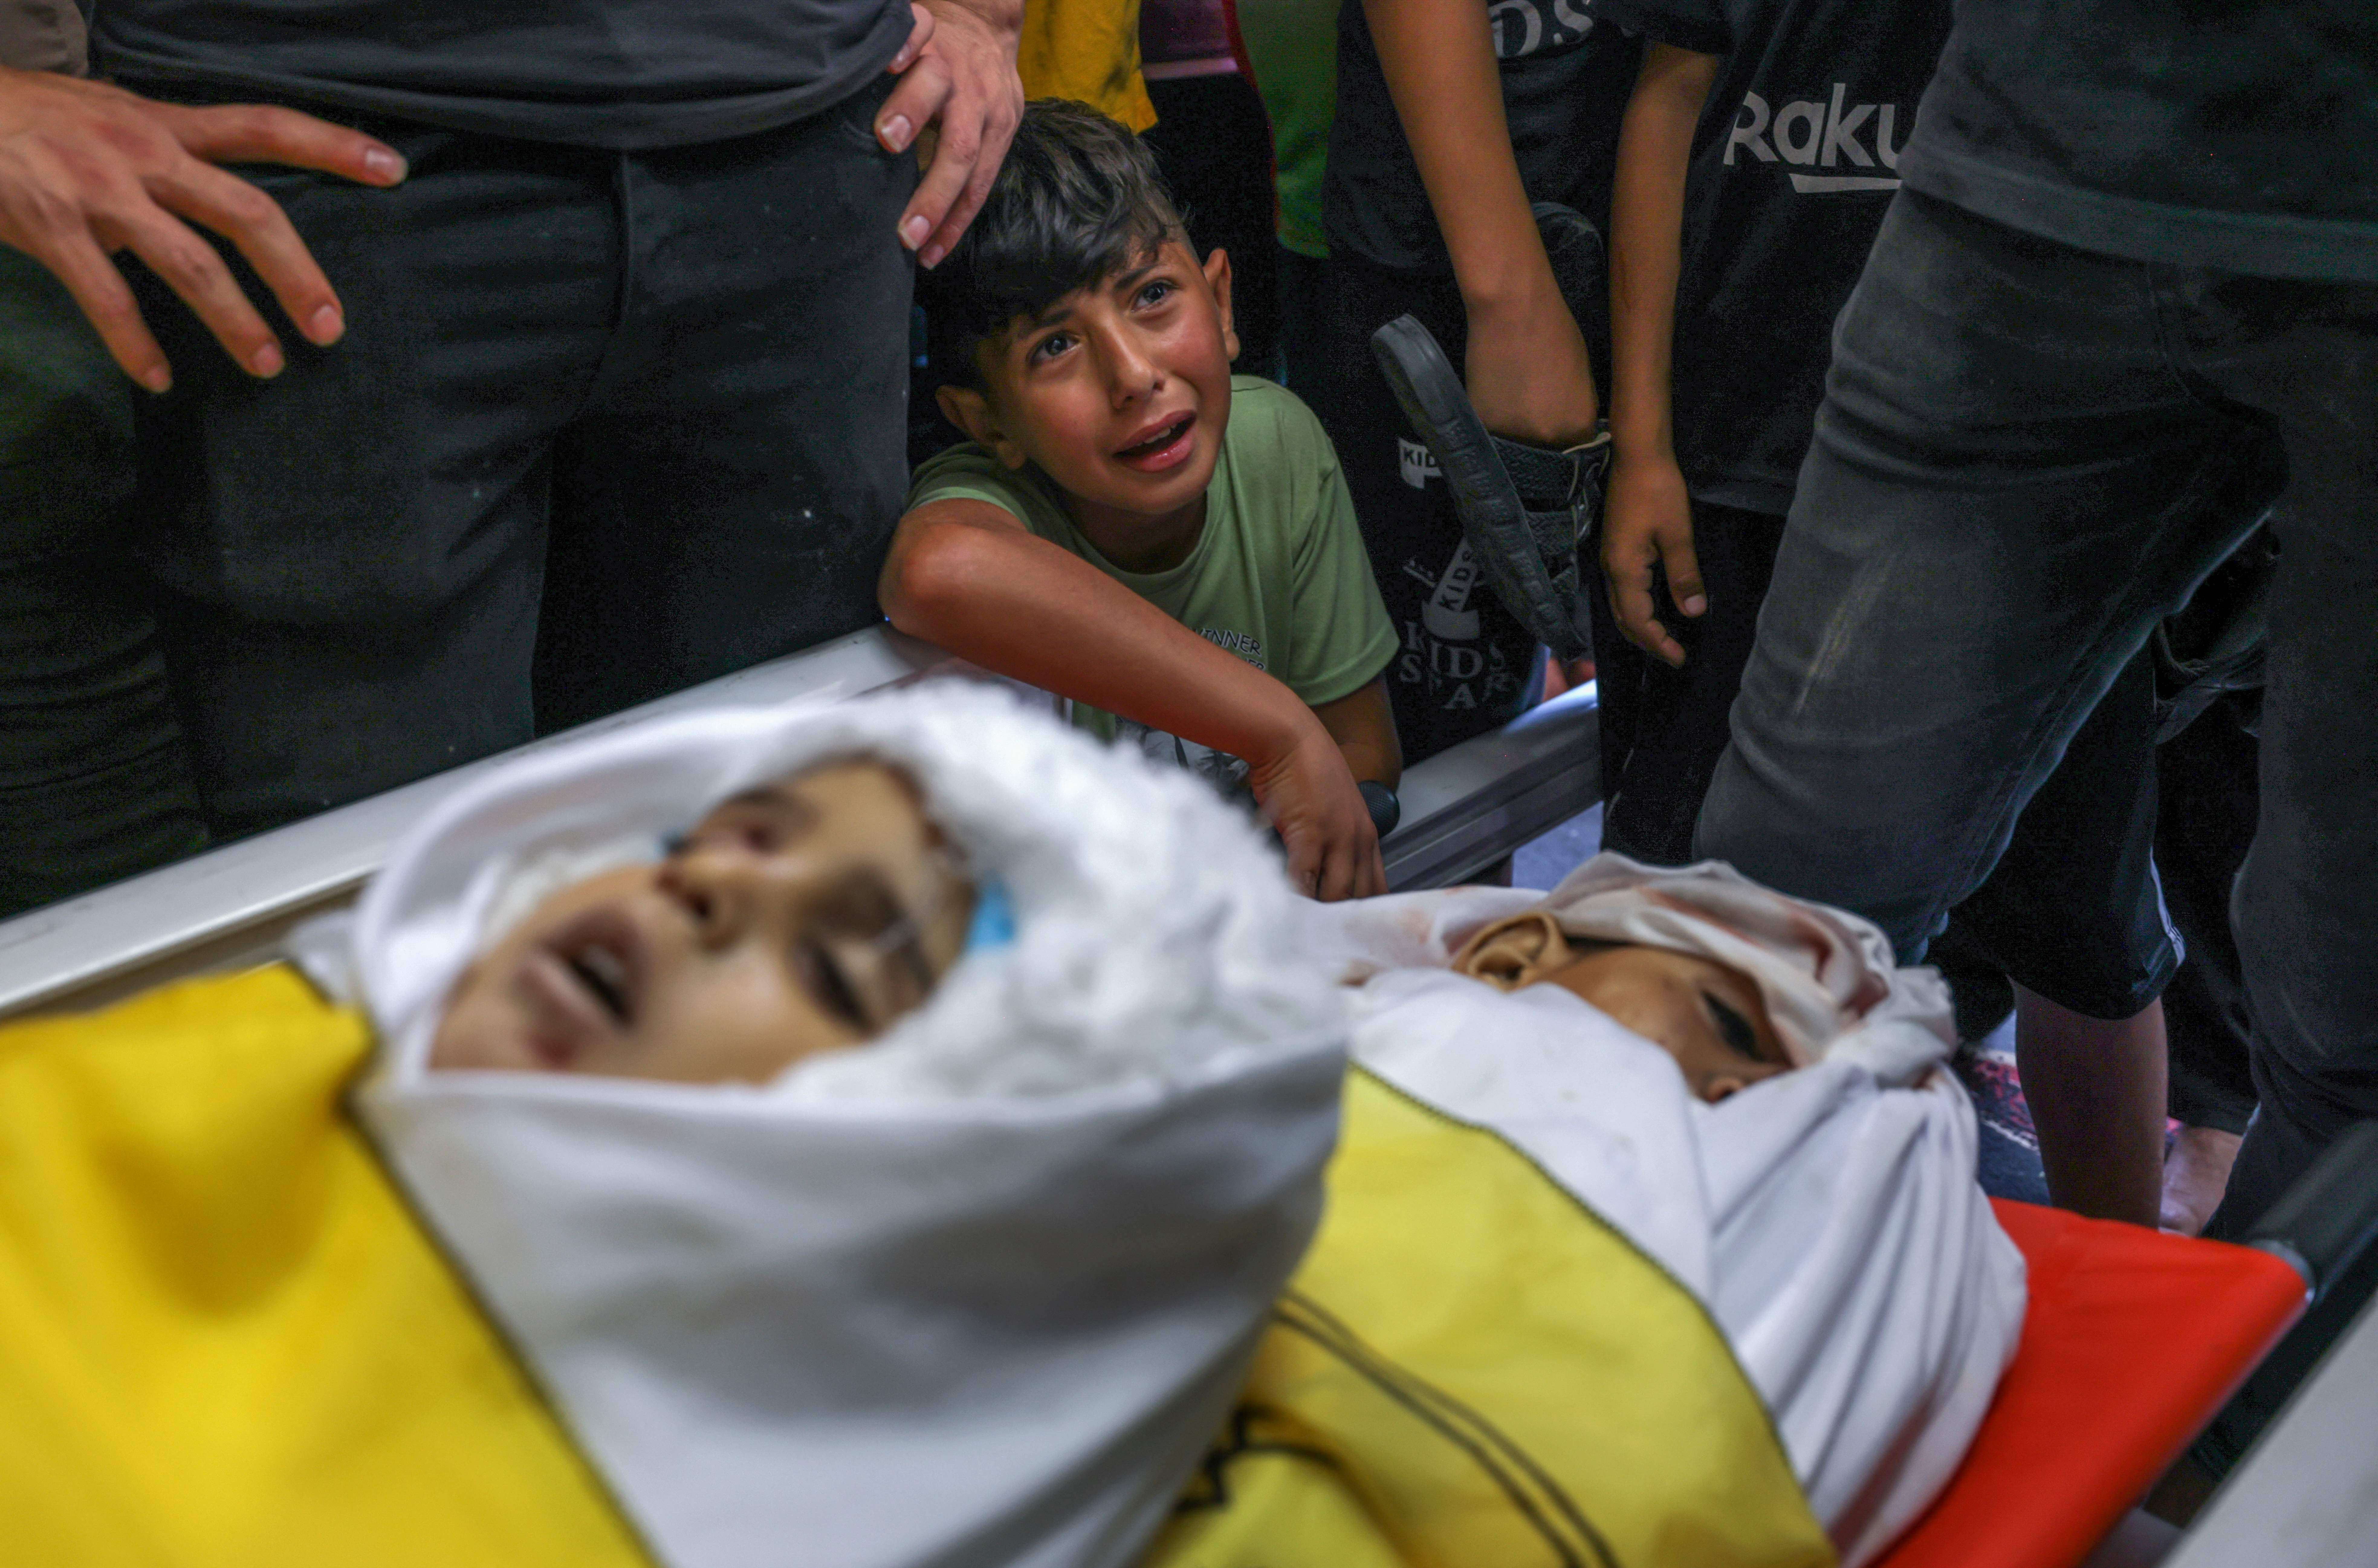 A boy cries by the bodies of four Palestinians from the Najm family during their funeral in Jabalia in the northern Gaza Strip on Aug. 8, 2022, after they were killed during the latest three days of conflict between Israel and Palestinian militants before a ceasefire